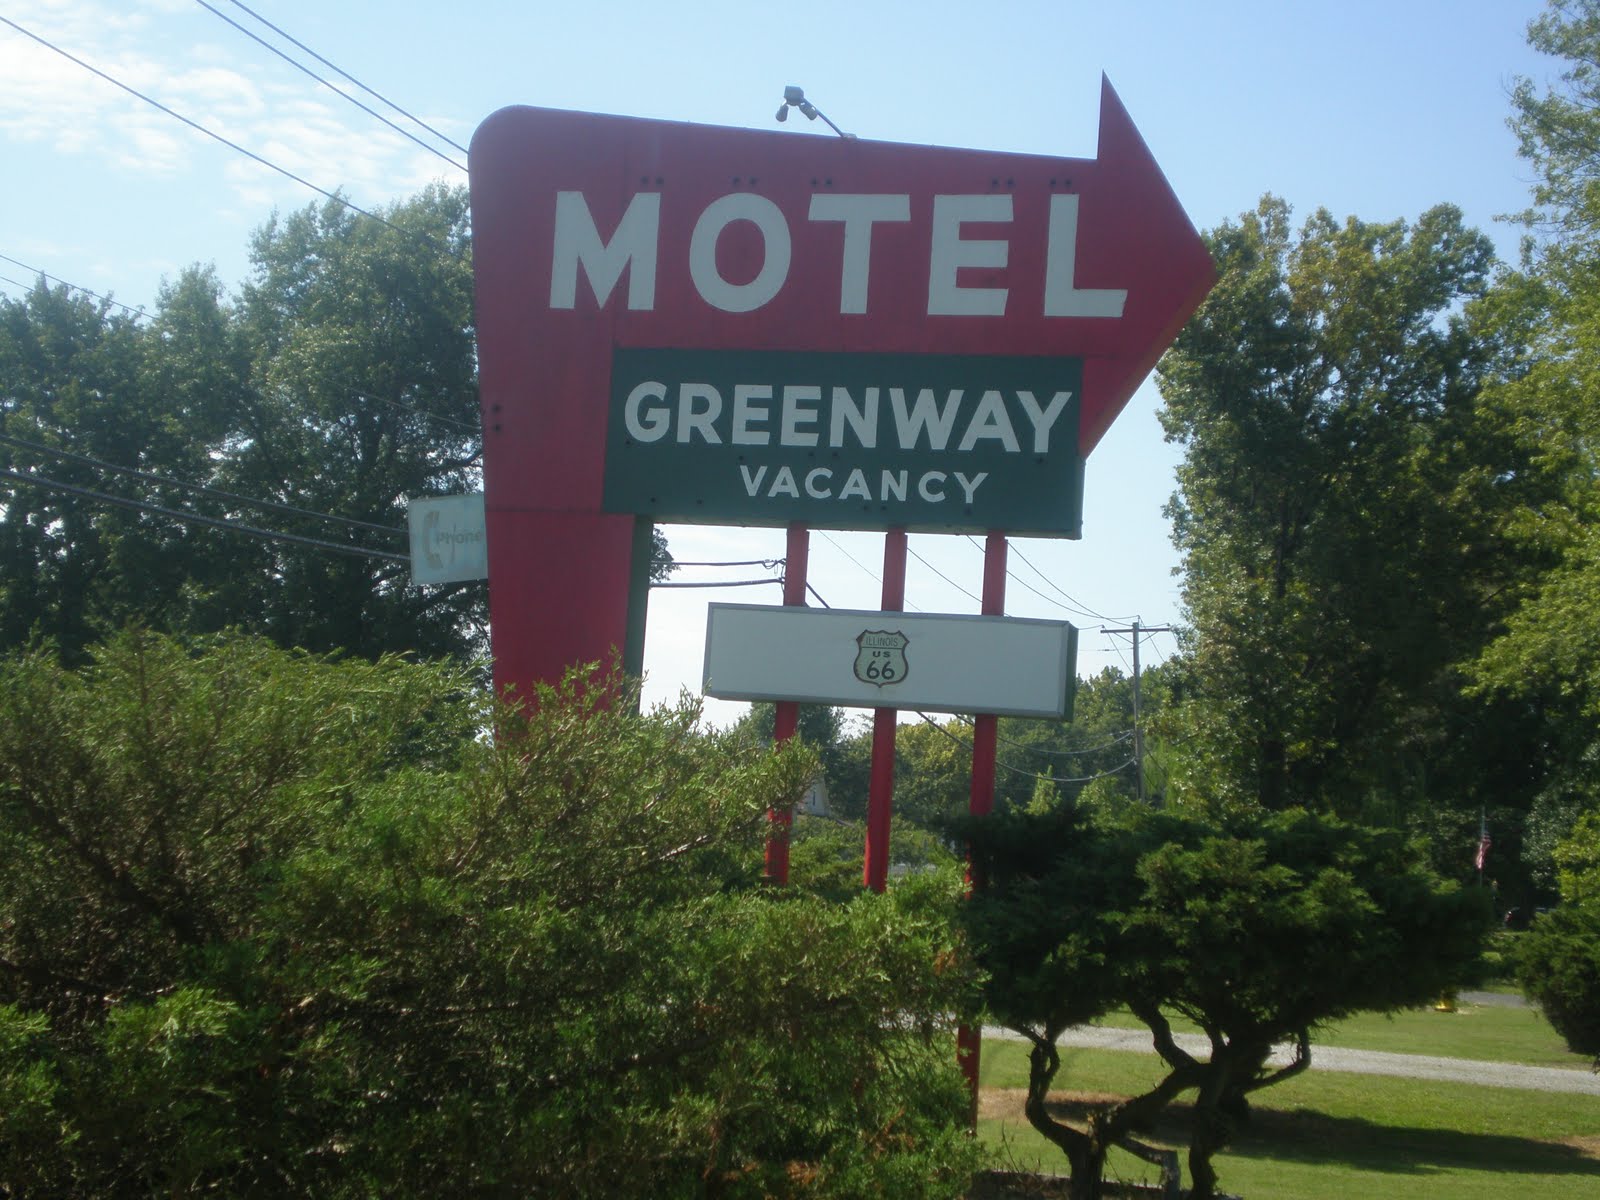 ROUTE 66: Meramac State Park, MO to Springfield, IL - Sept 14 - Day 14